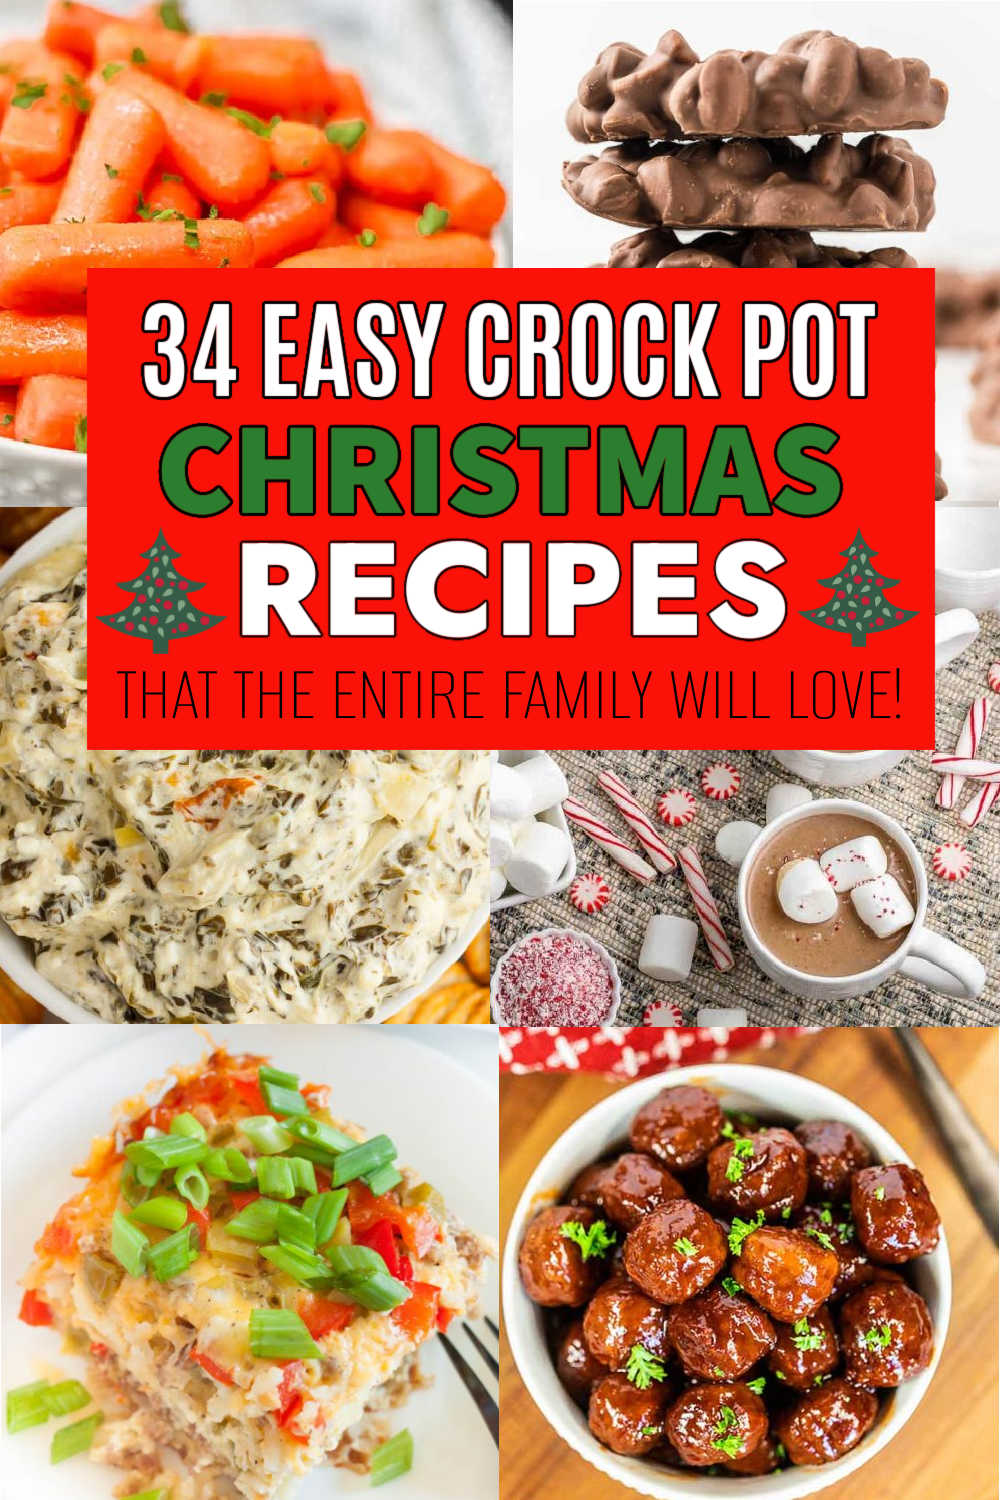 15+ Christmas Slow-Cooker Recipes to Free Up Your Oven